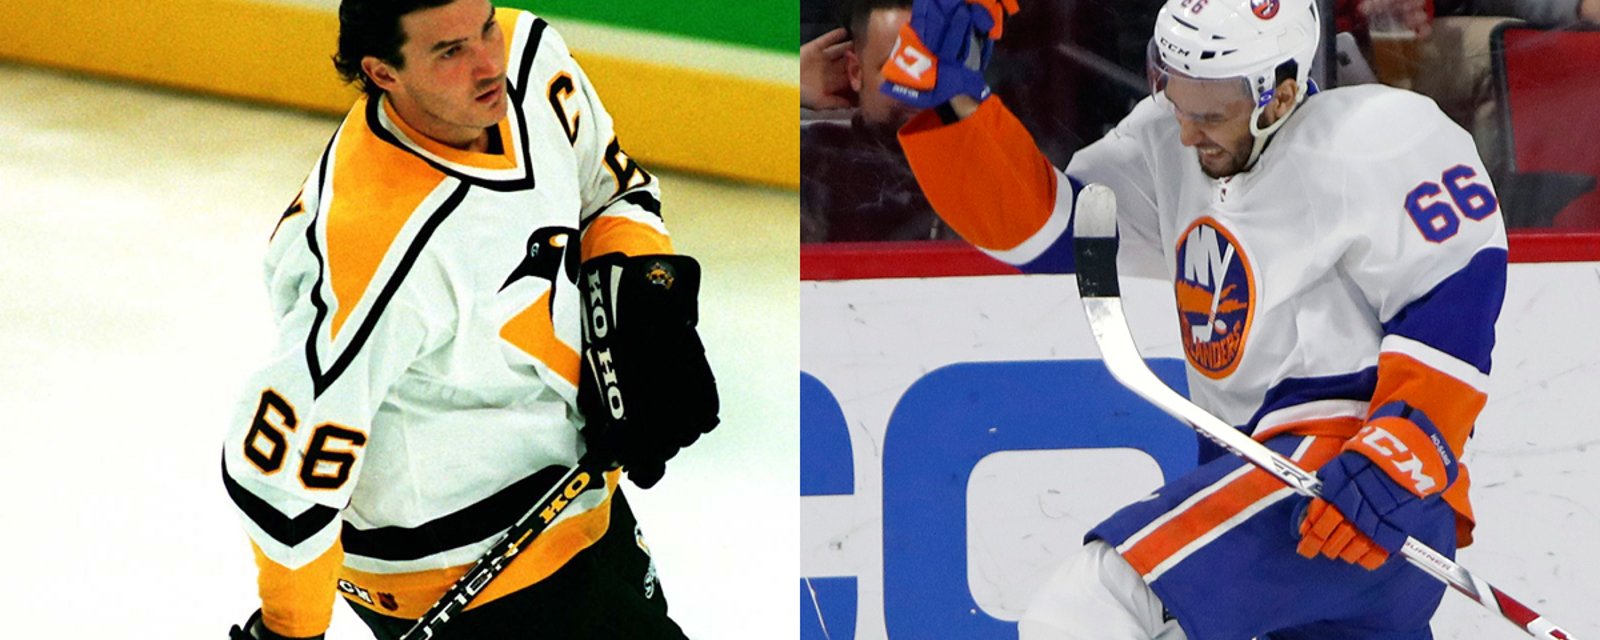 Mario Lemieux finally speaks up about Josh Ho-Sang wearing his number 66!